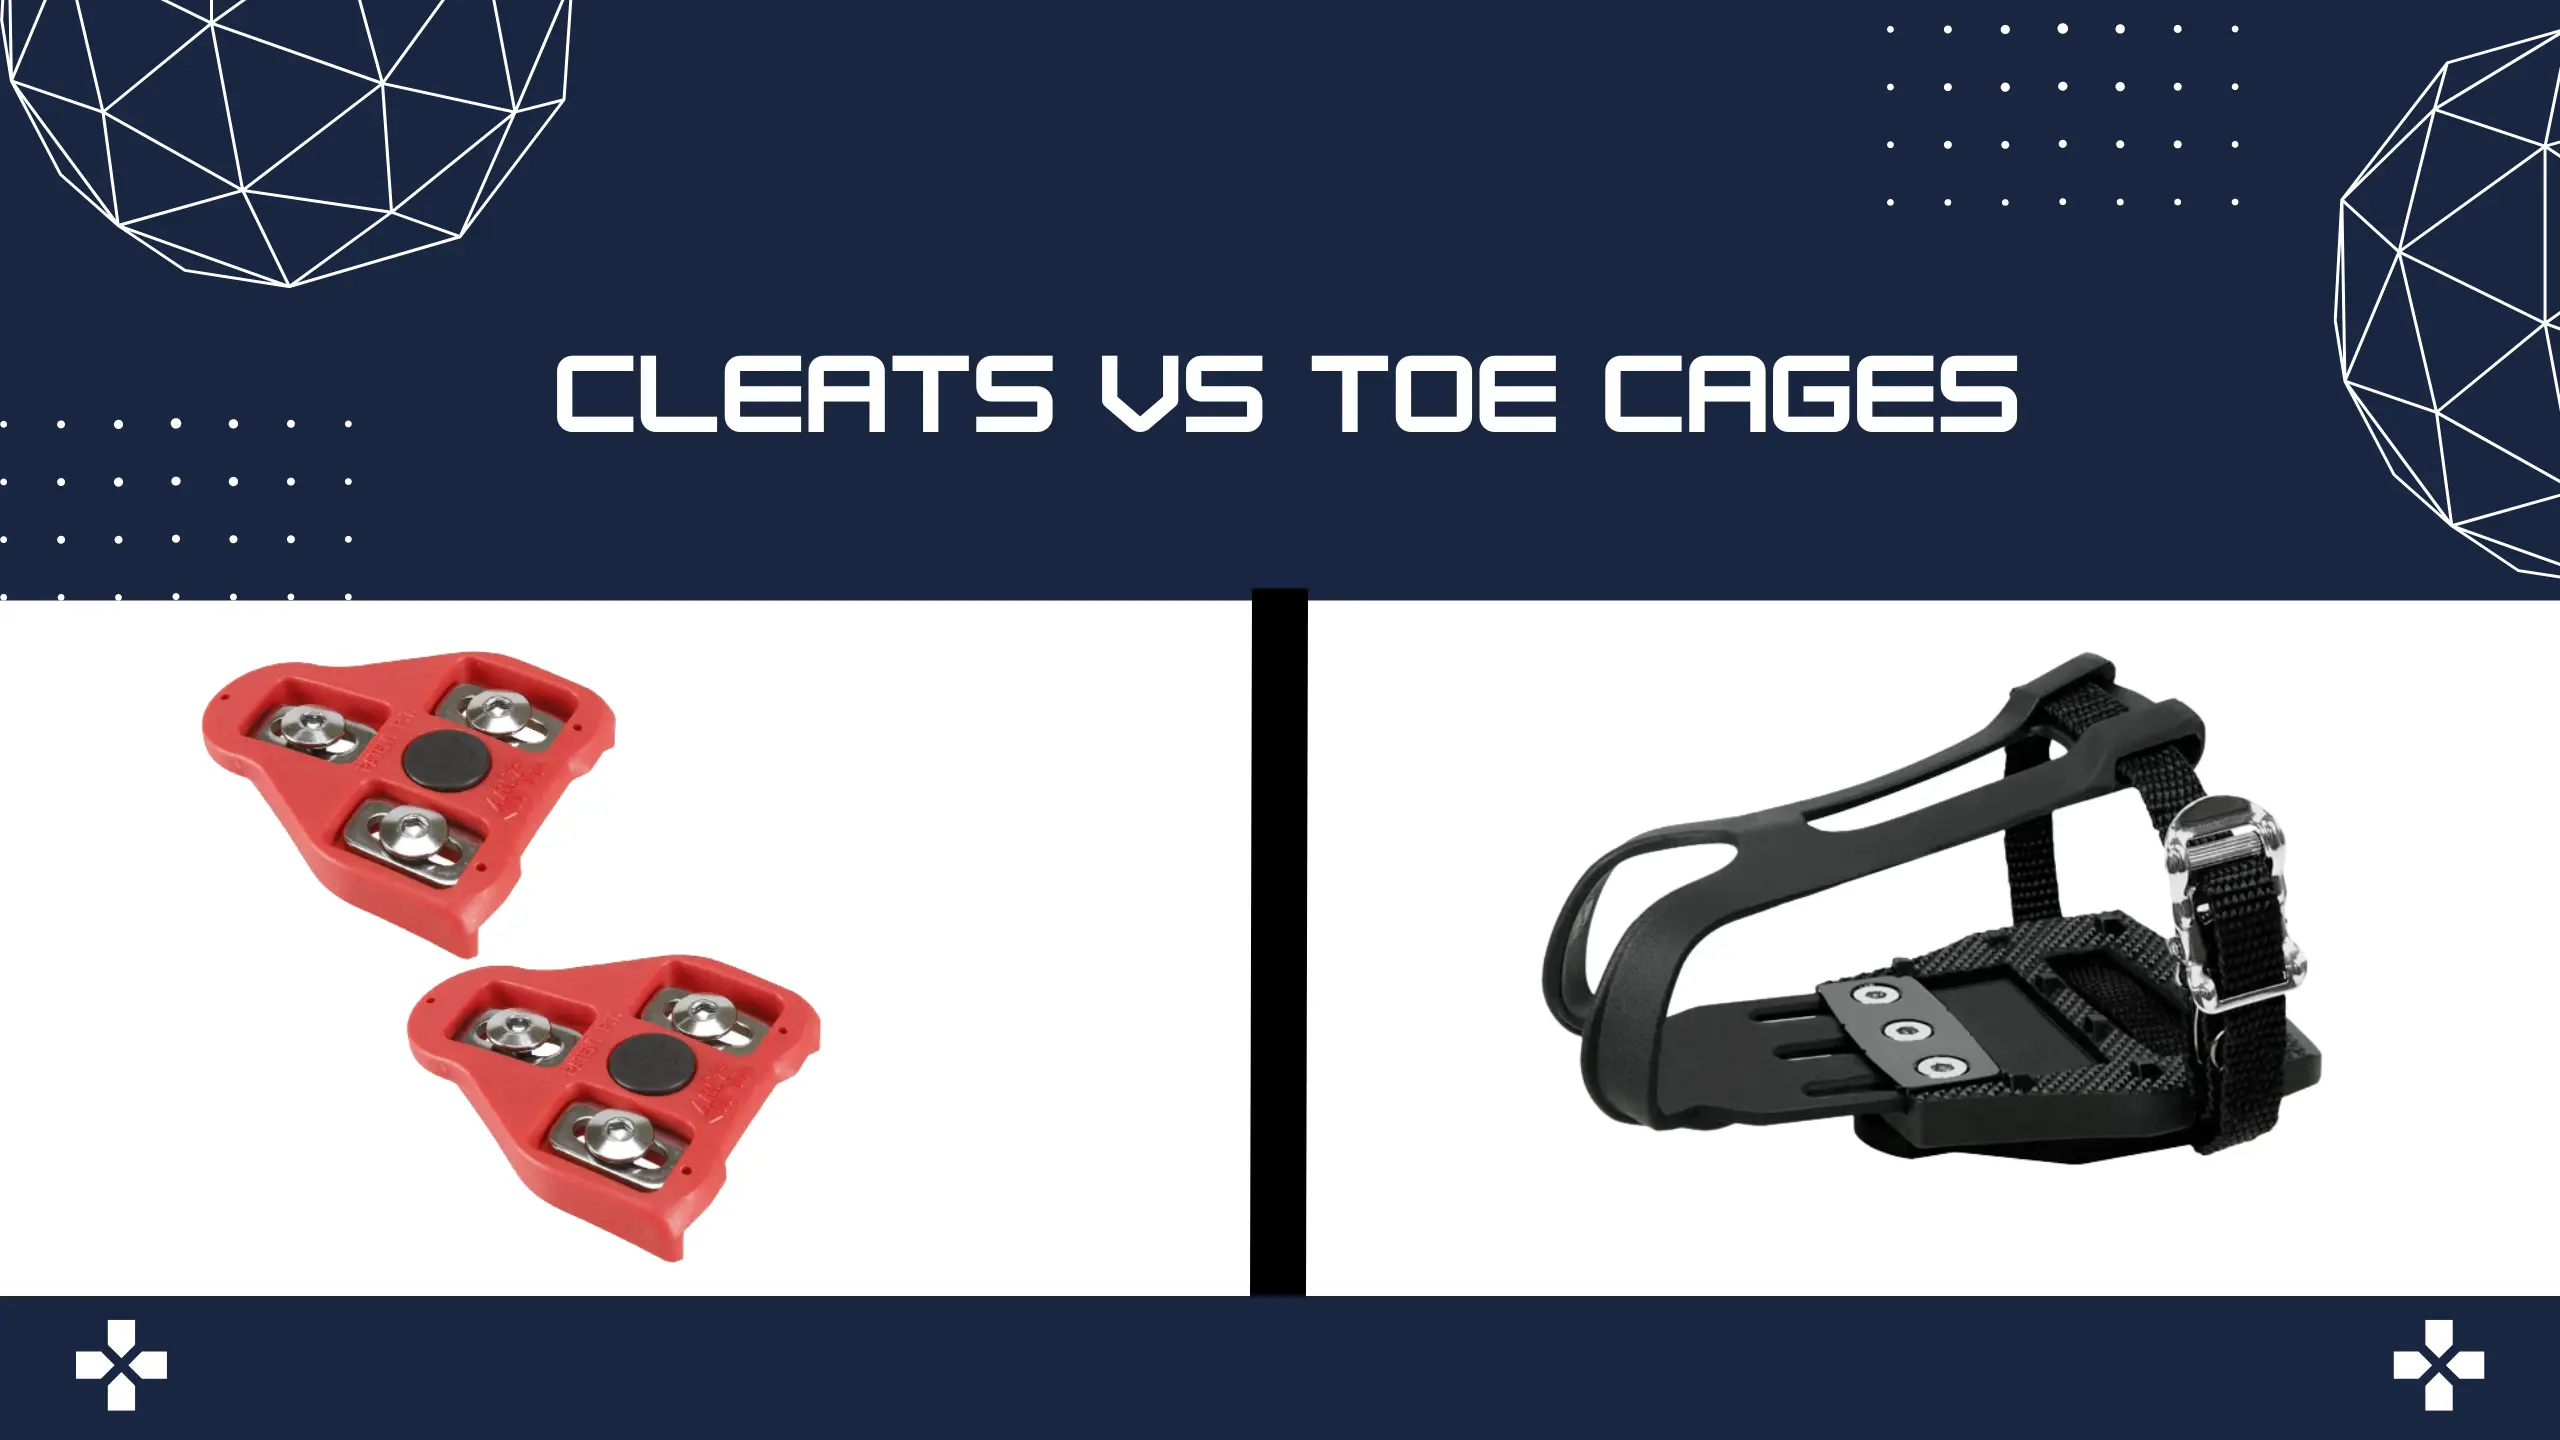 What is The Difference Between Cleats And Toe Cages